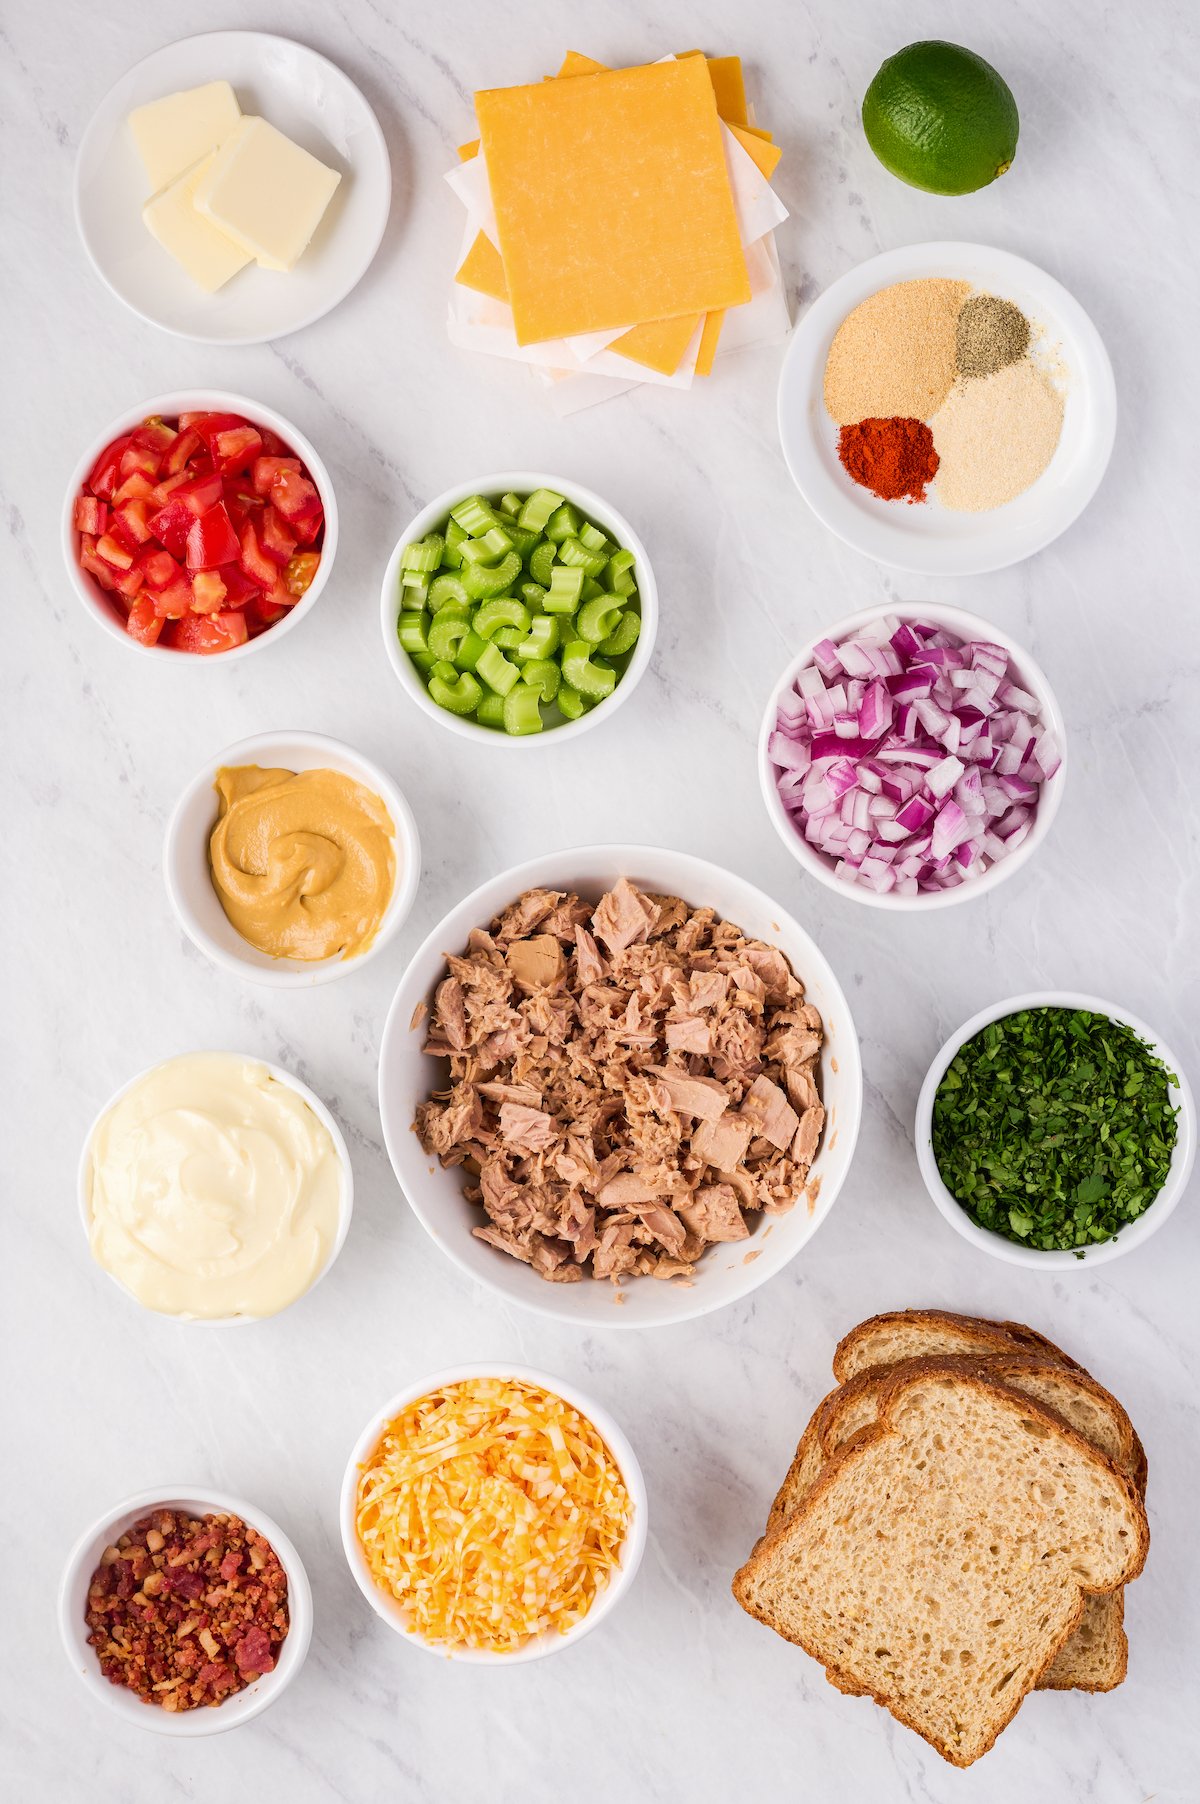 Left to right, from top: pats of butter, sliced cheese, lime, tomato, celery, garlic powder, onion powder, cayenne pepper, black pepper, mustard, red onion, mayonnaise, tuna, cilantro, bacon, cheese, bread.